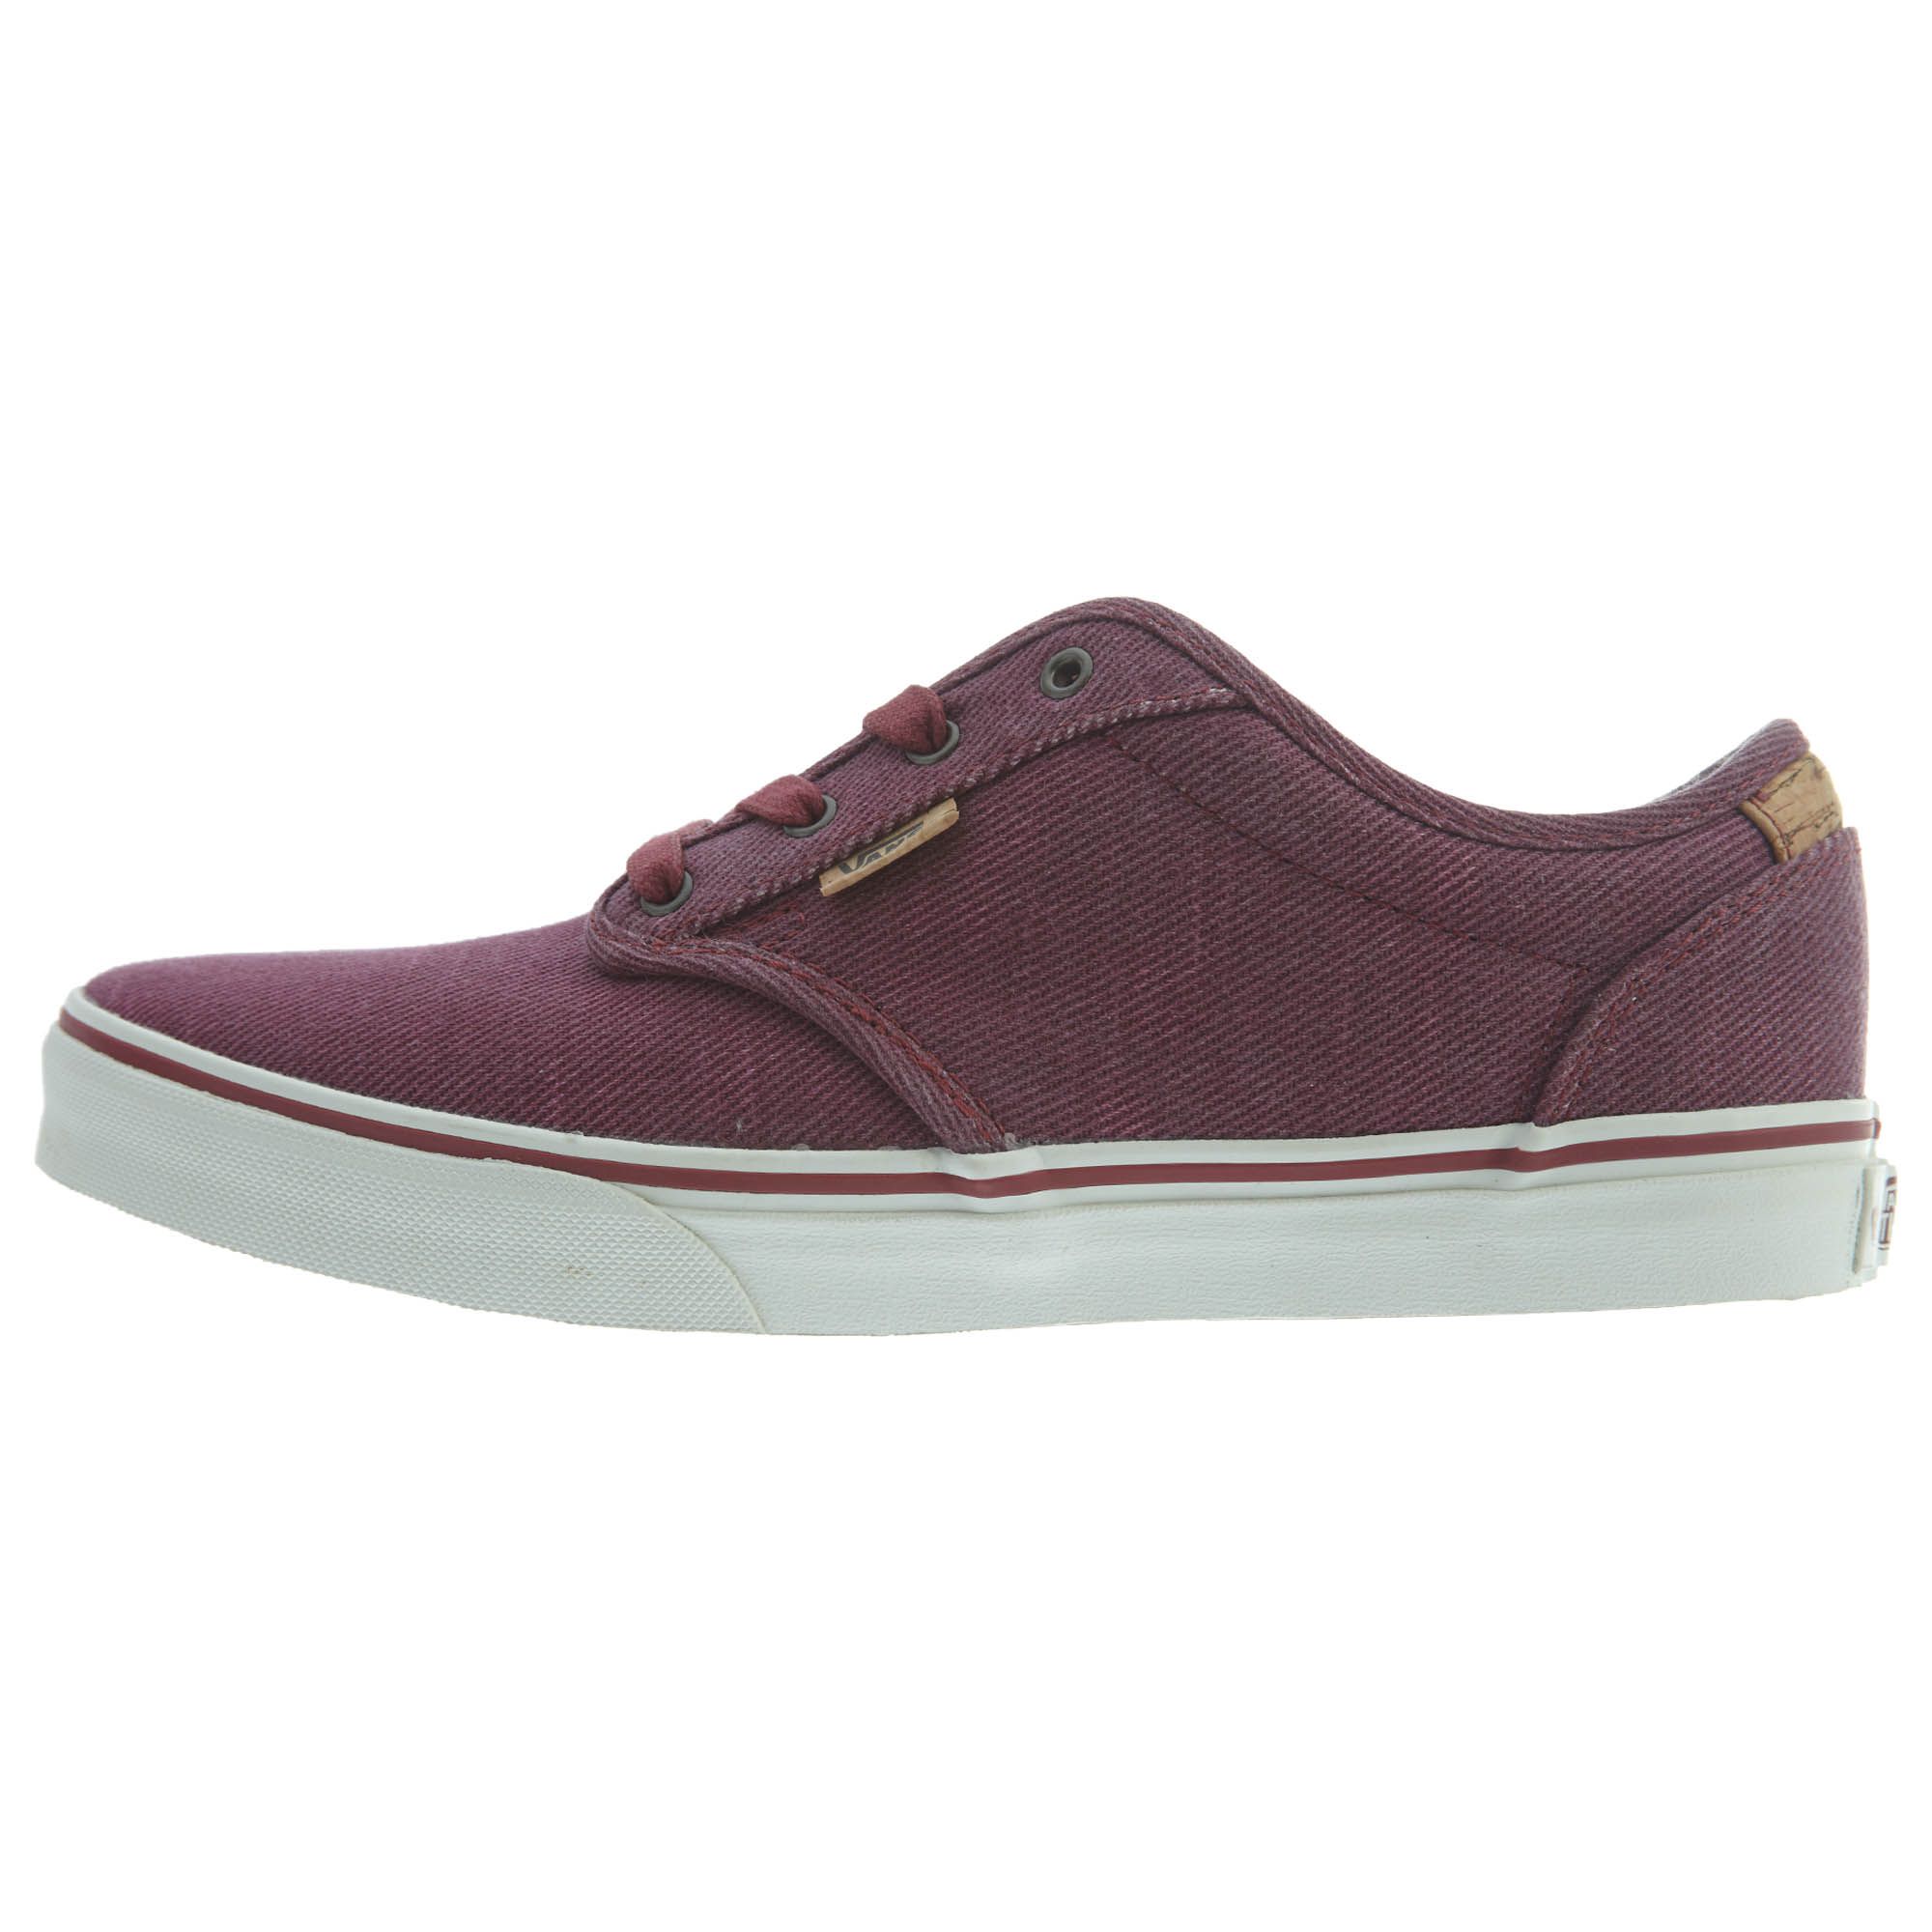 Vans Atwood Deluxe (Washed Twill) Big 